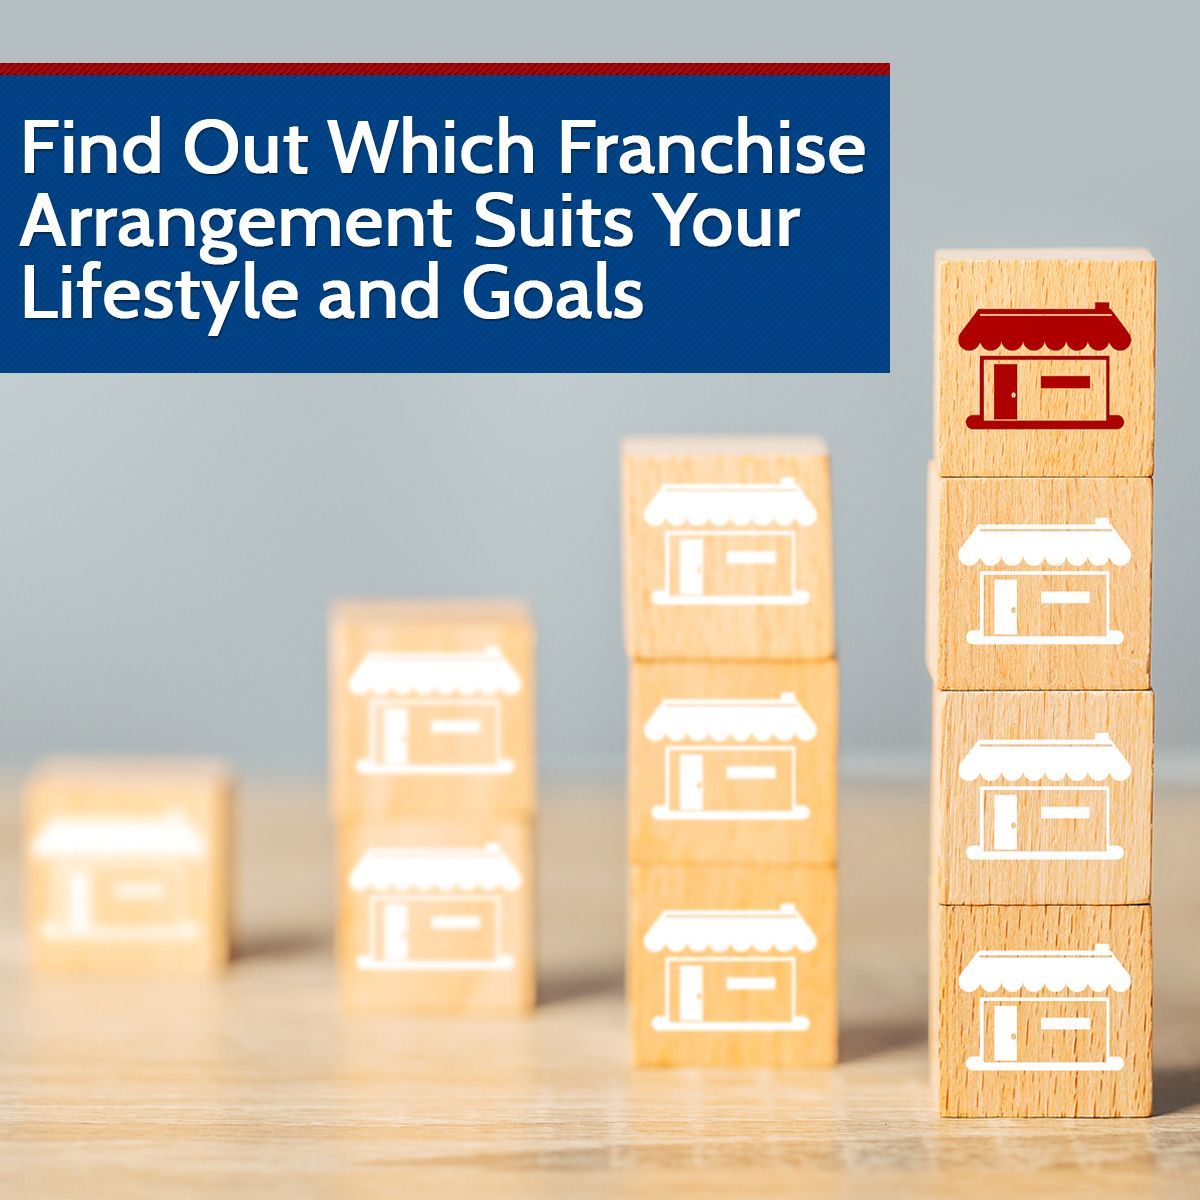 Find Out Which Franchise Arrangement Suits Your Lifestyle and Goals